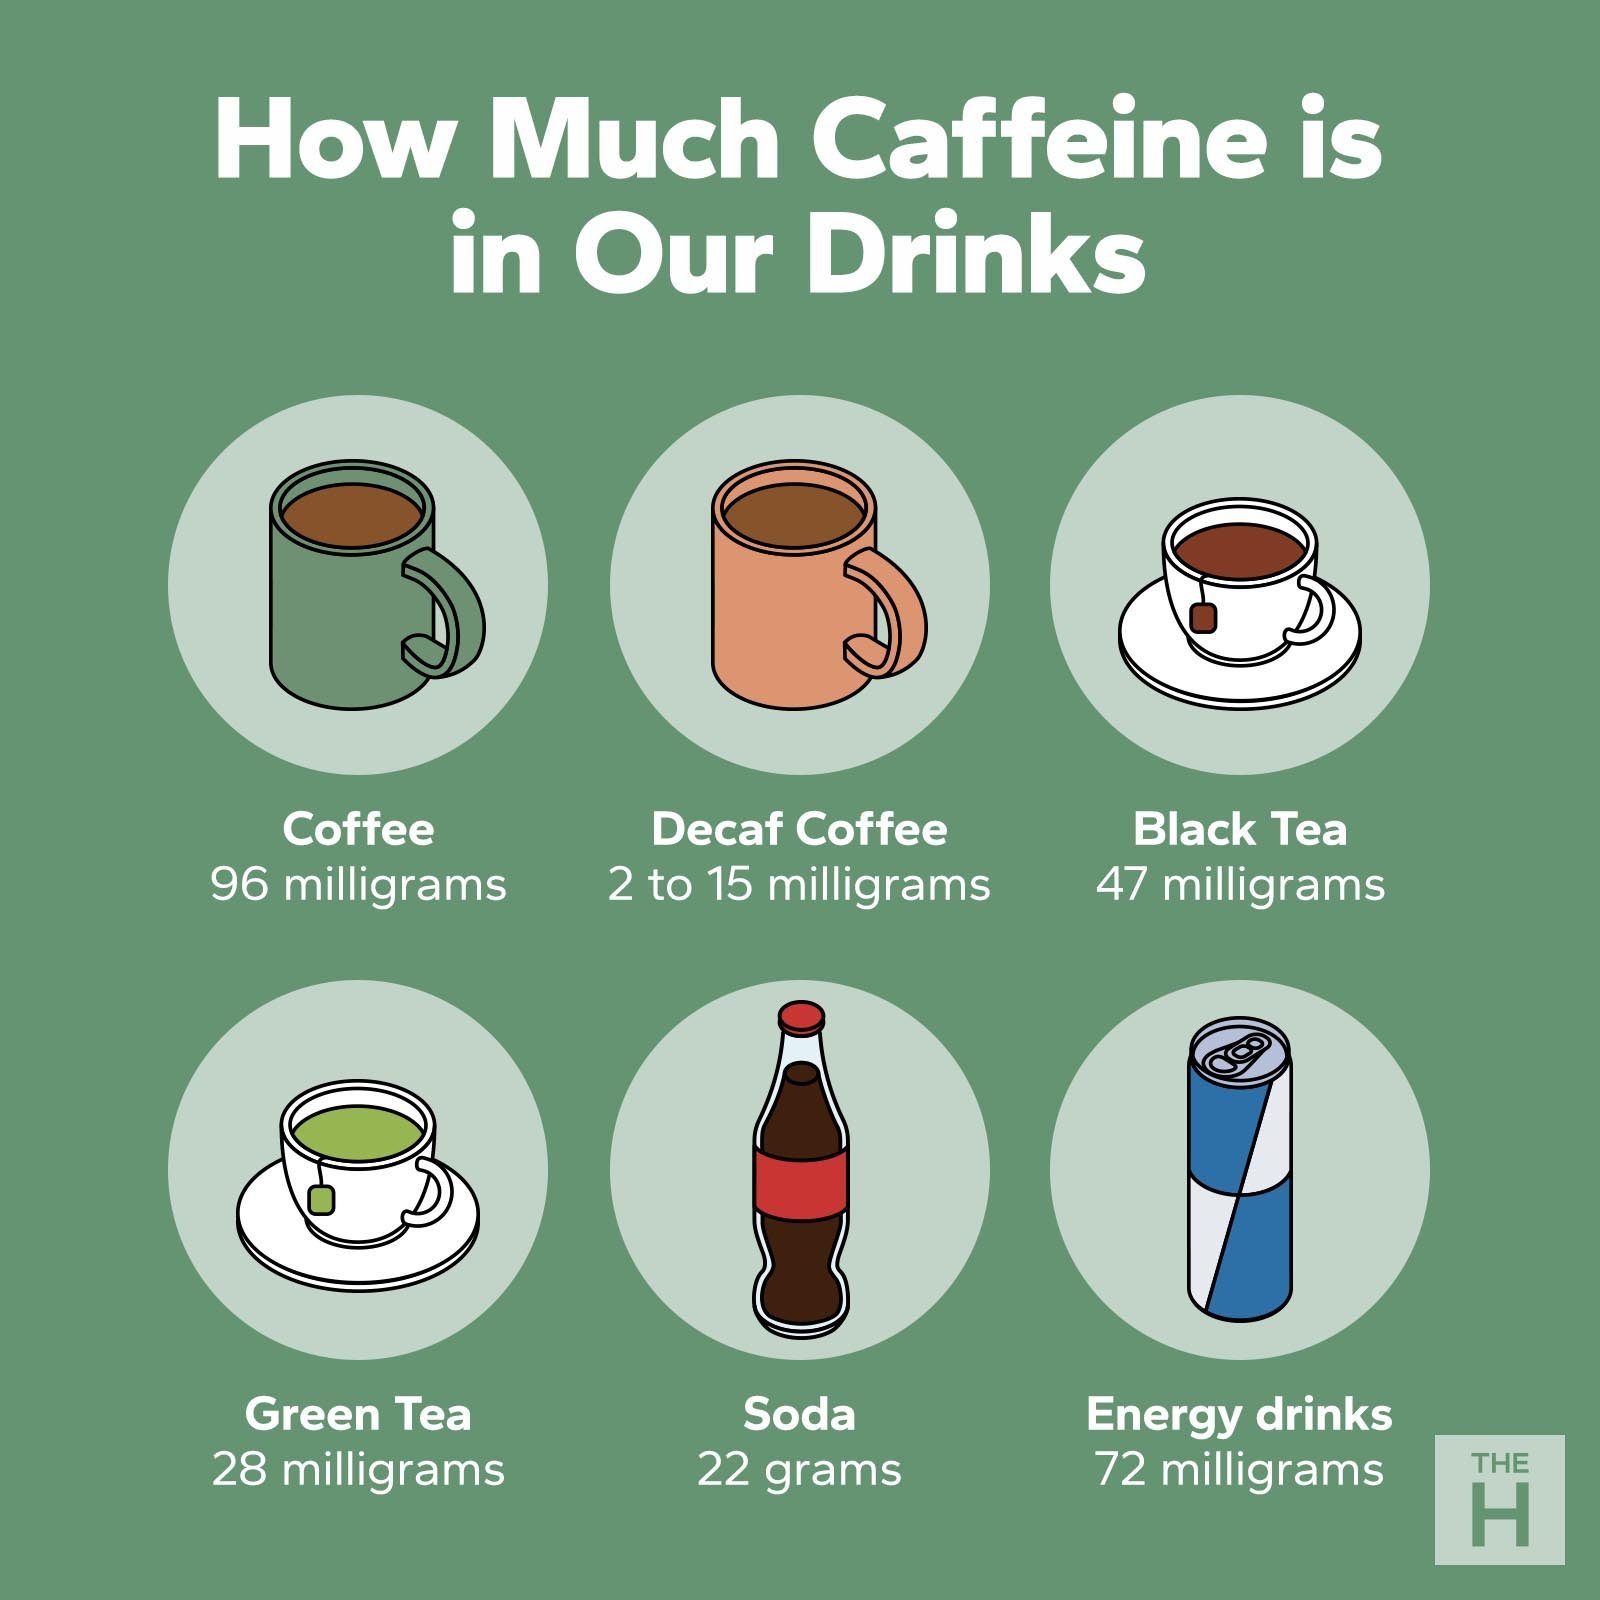 How Much Caffeine Is in a Cup of Coffee?